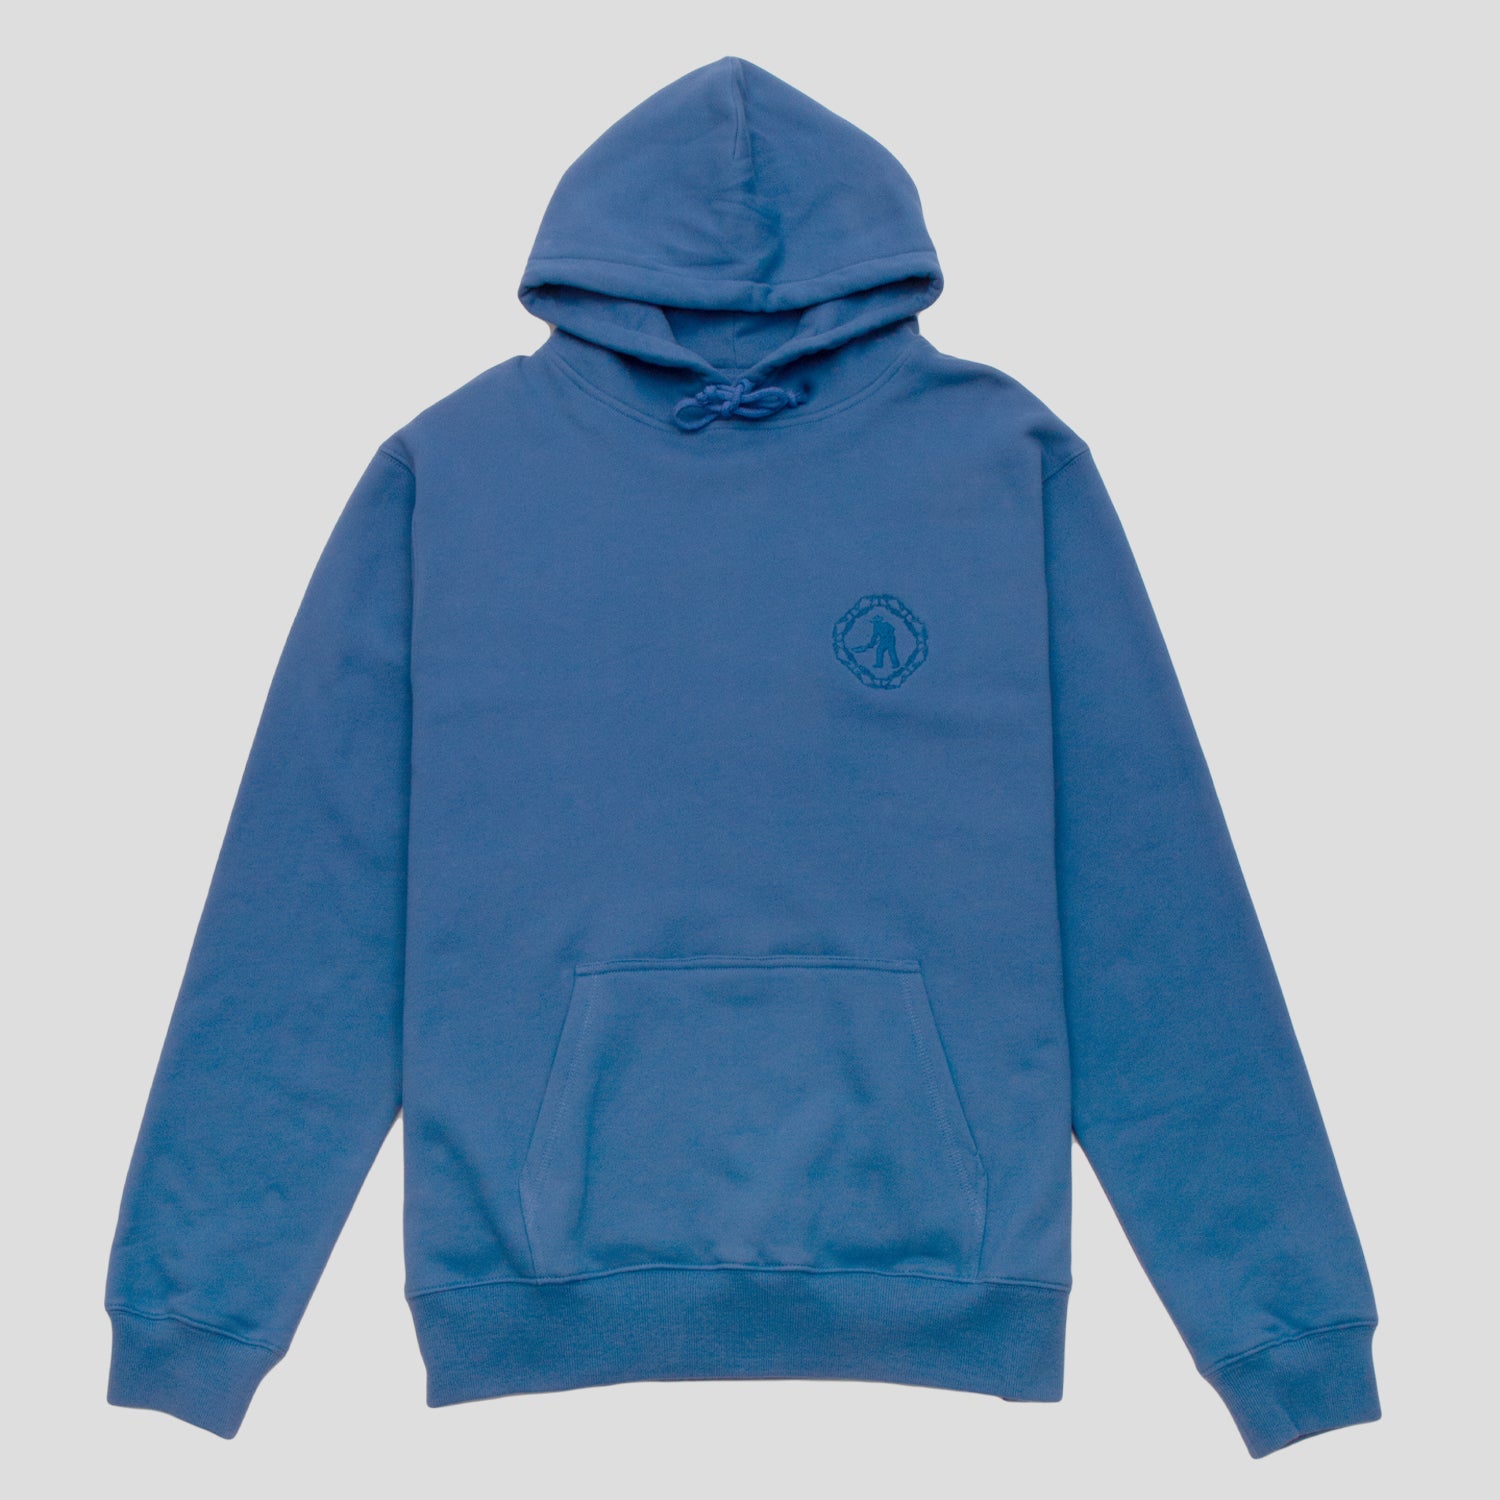 Pass~Port Organic Embroidery Hoodie - Royal Blue